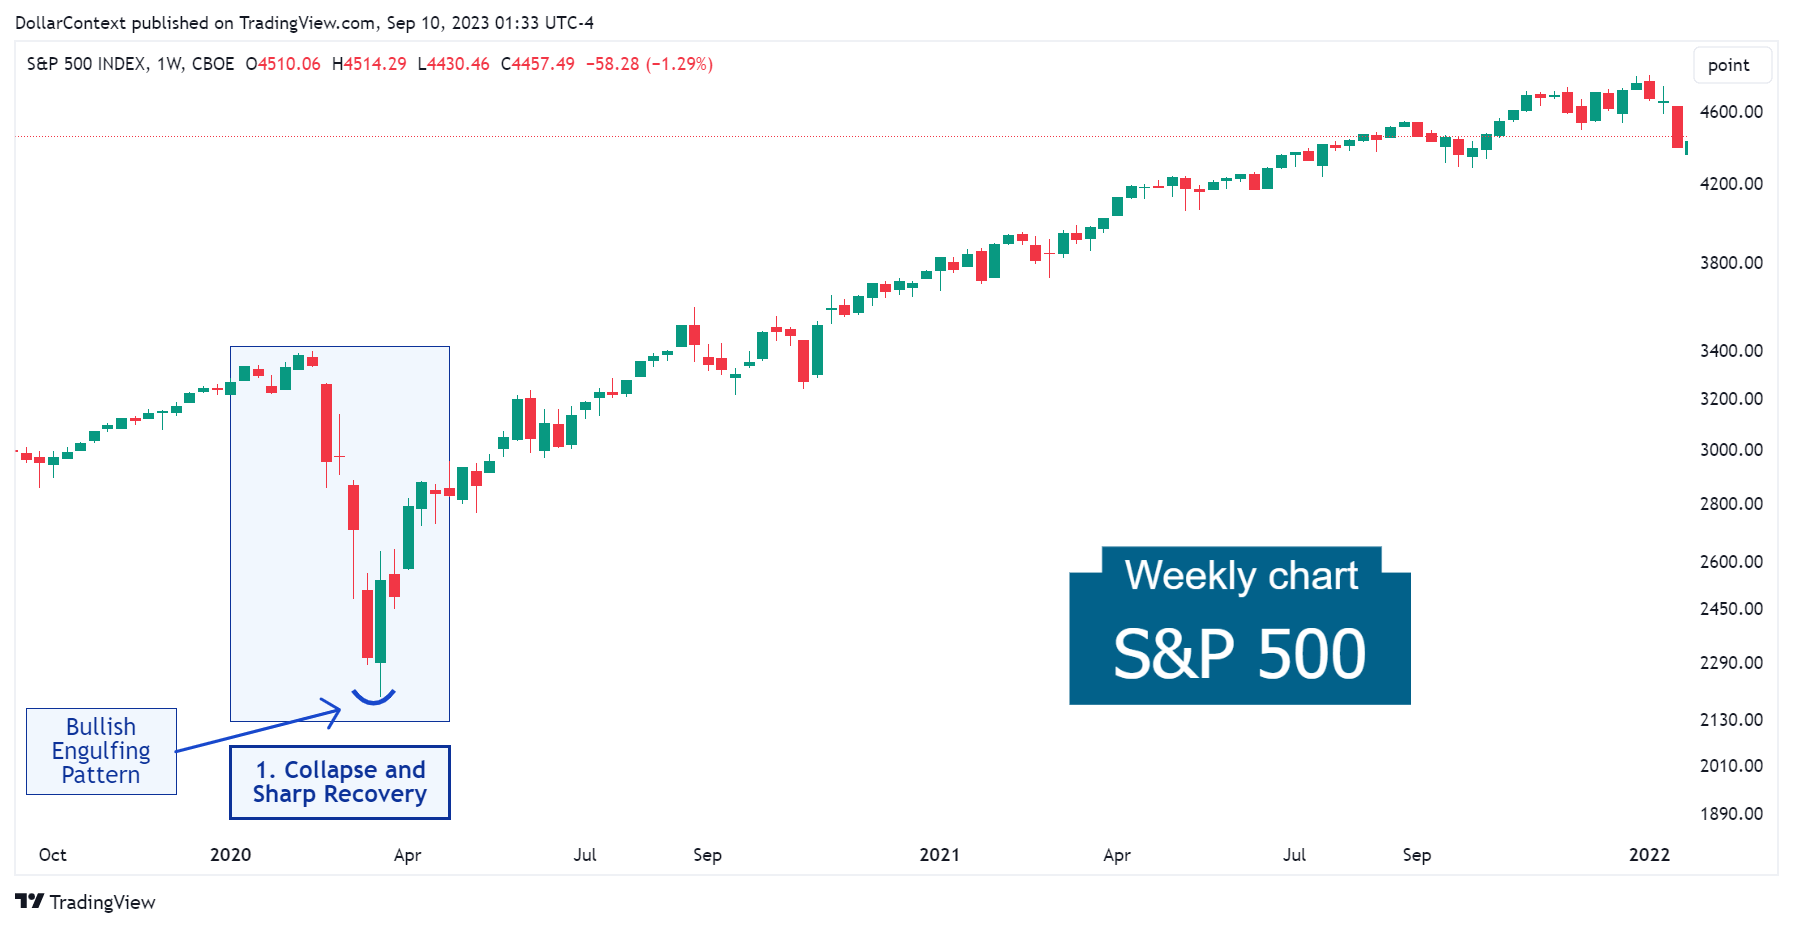 S&P 500: Extreme Volatility in Early 2020 (Weekly Chart)